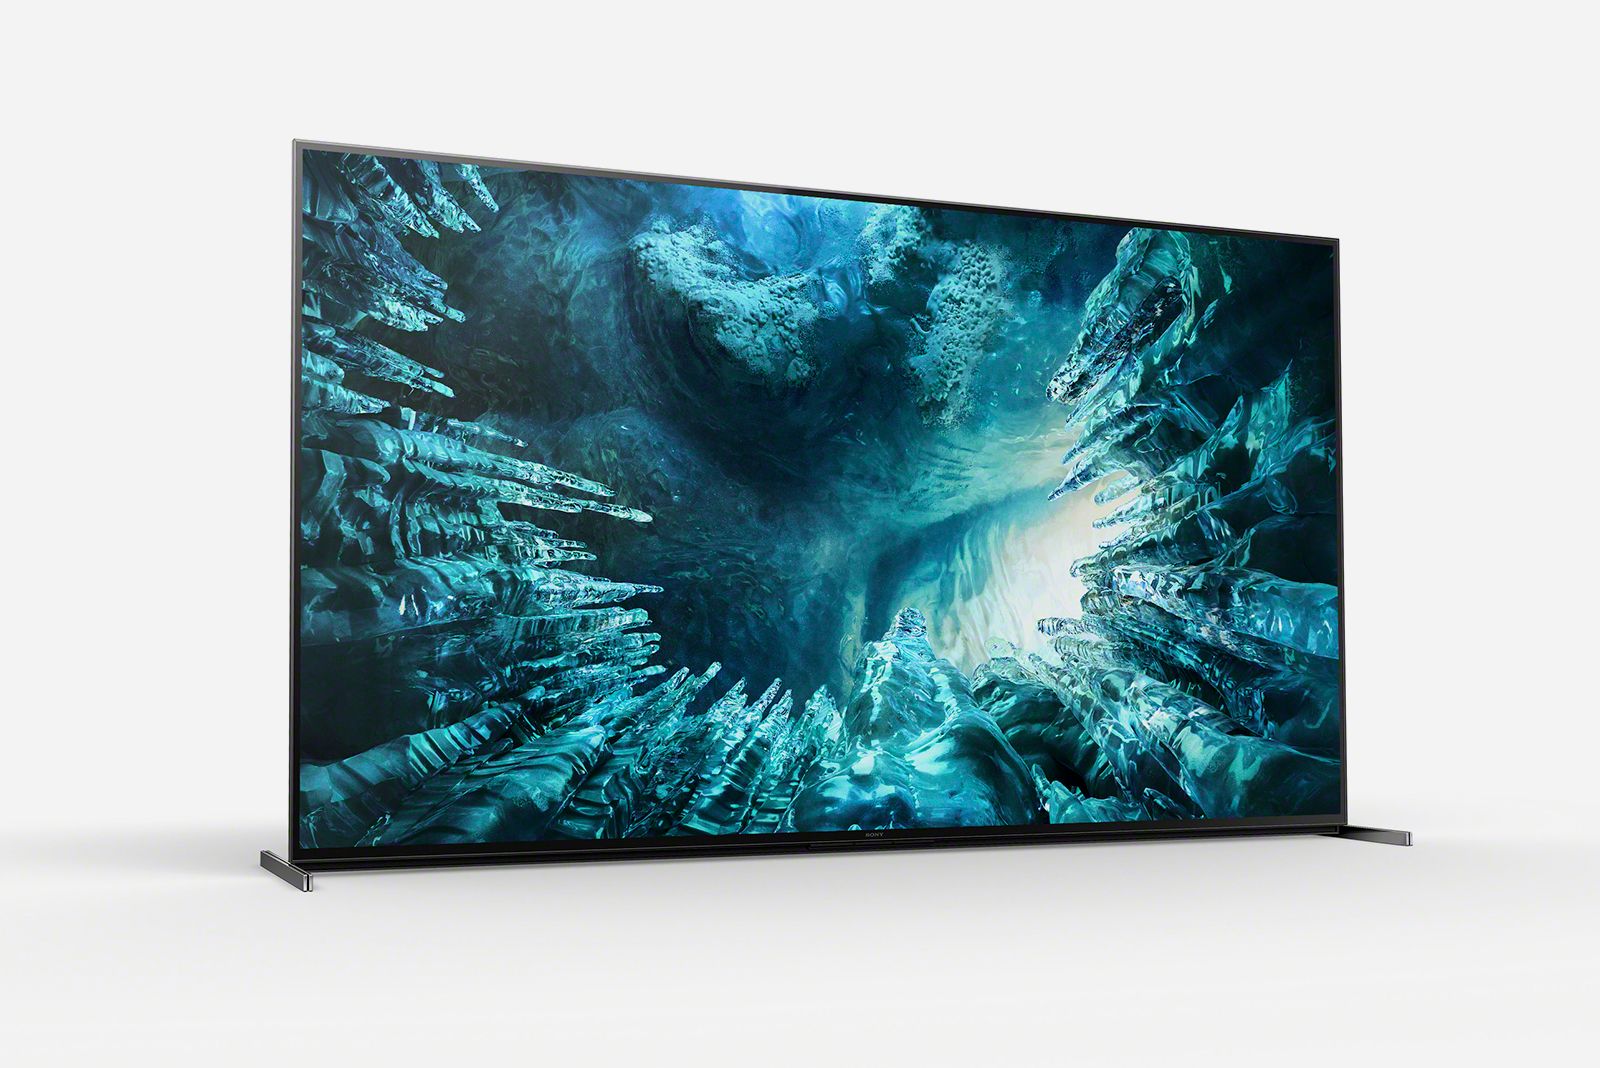 Sonys 2020 TV lineup includes its smallest 4K OLED ever image 2